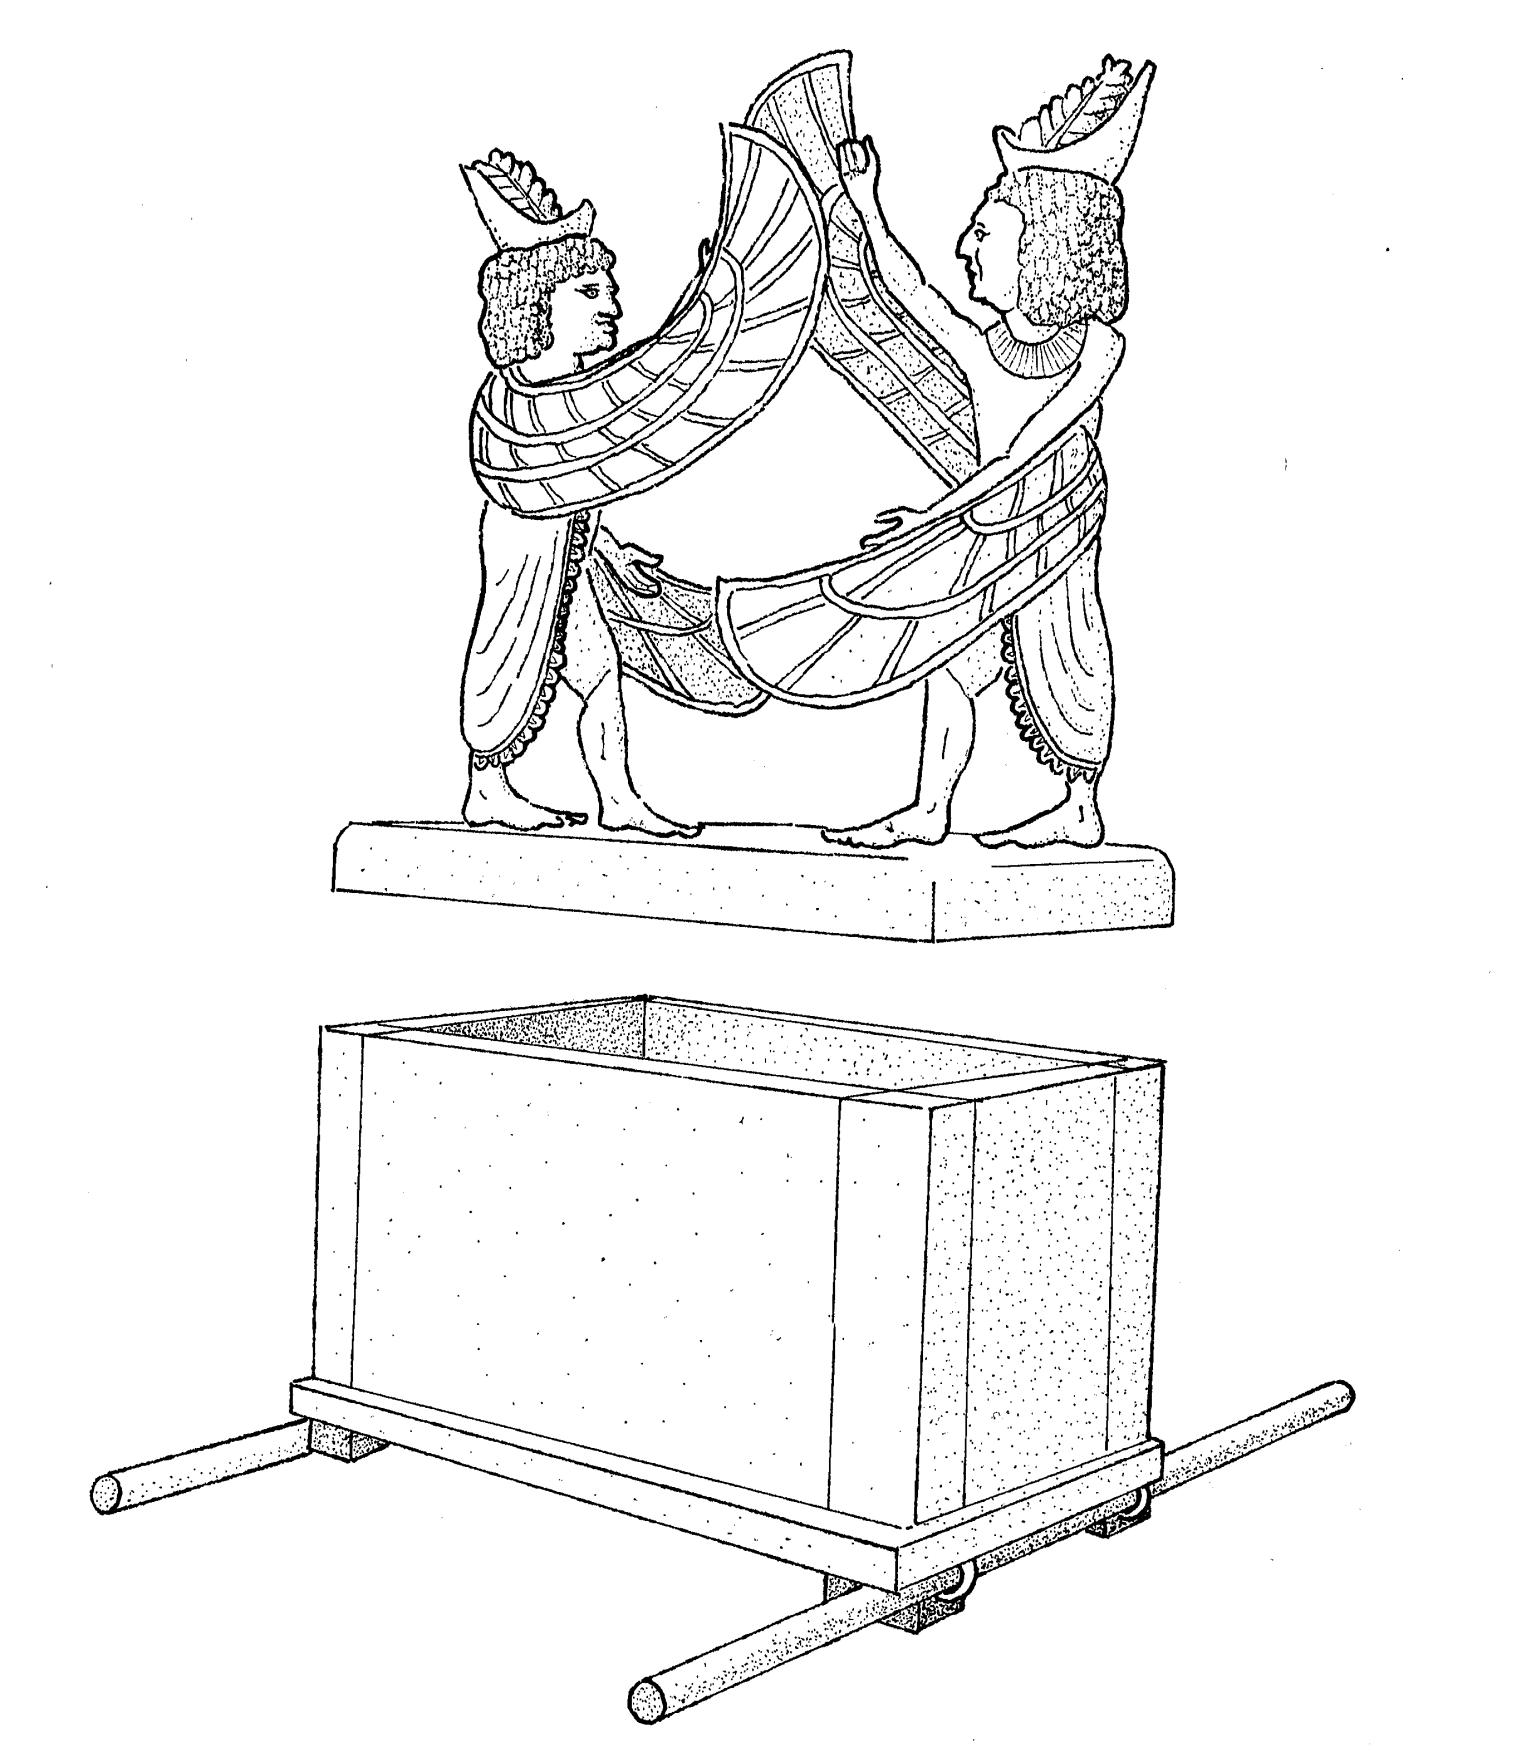 Rectangular box and separated lid with two winged figures standing across from each other.